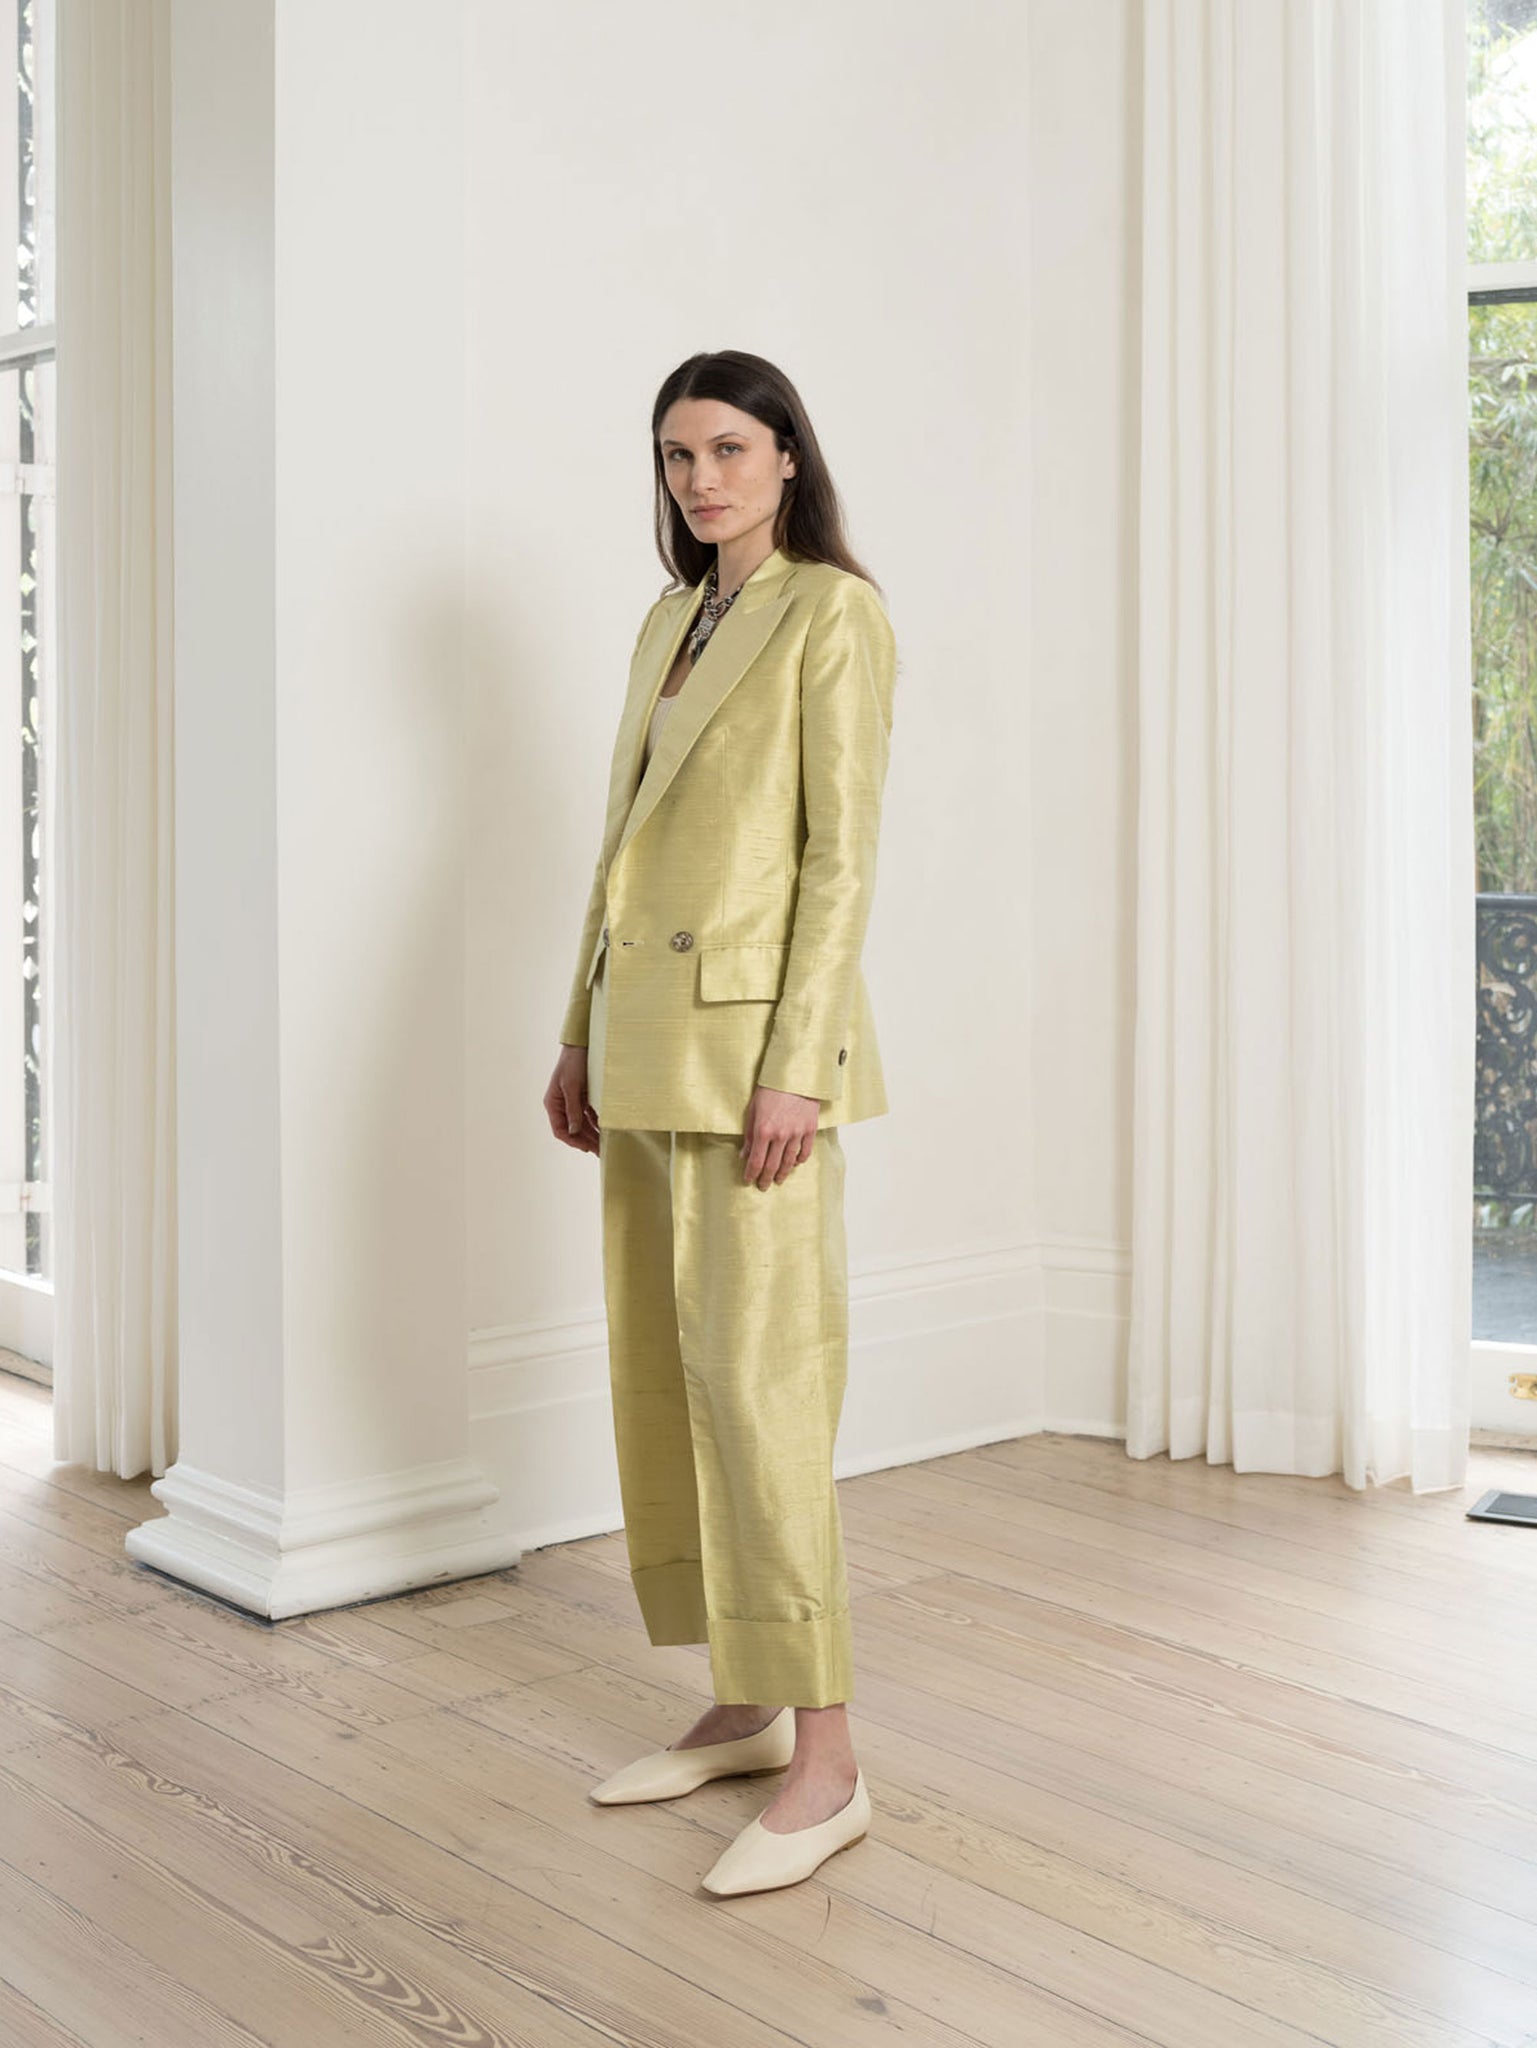 The Signature Dropped Lapel Jacket in Chartreuse Silk